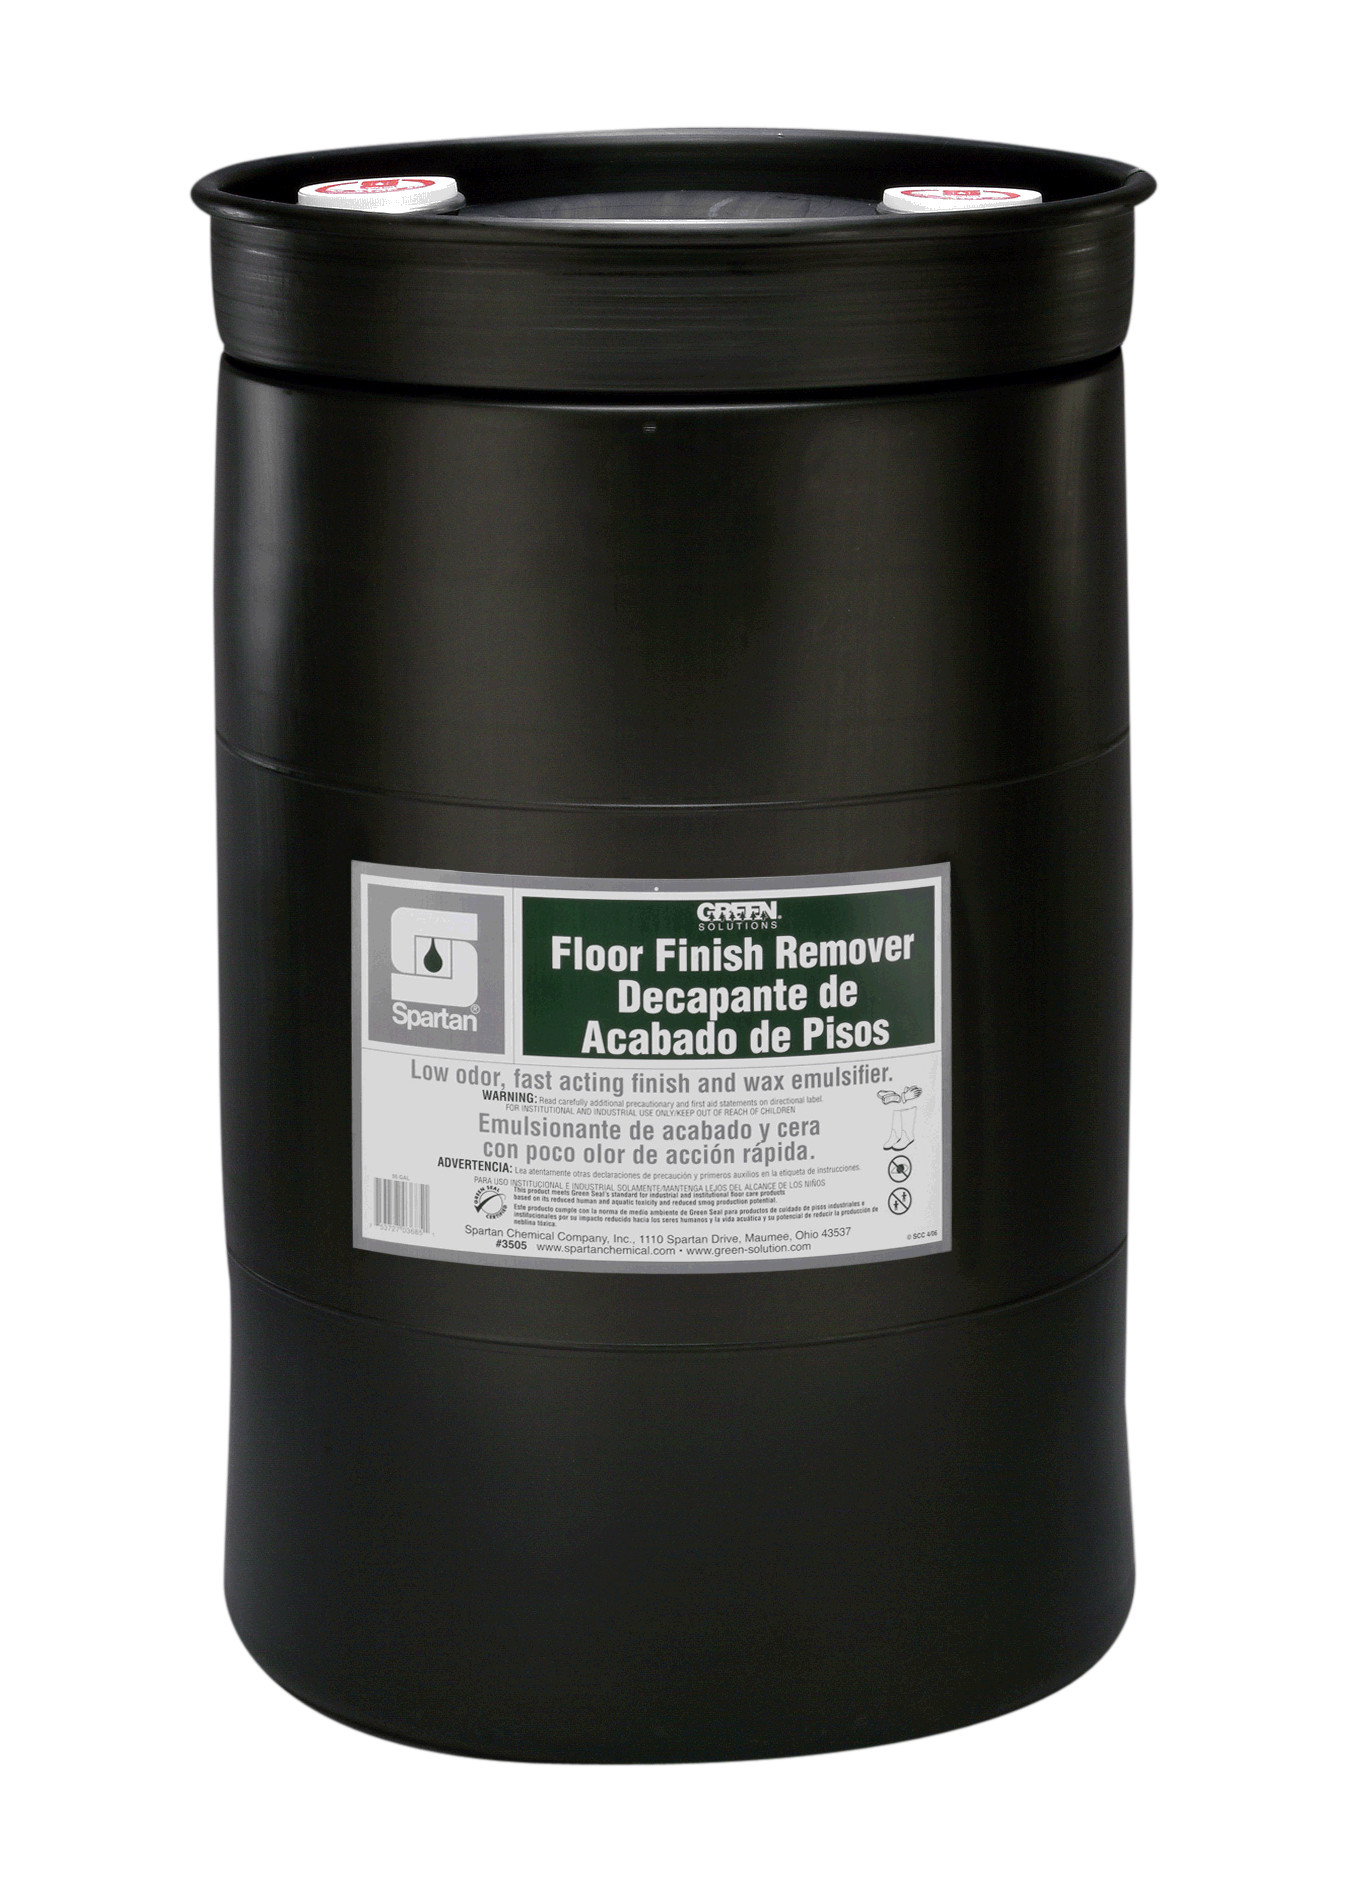 Spartan Chemical Company Green Solutions Floor Finish Remover, 30 GAL DRUM